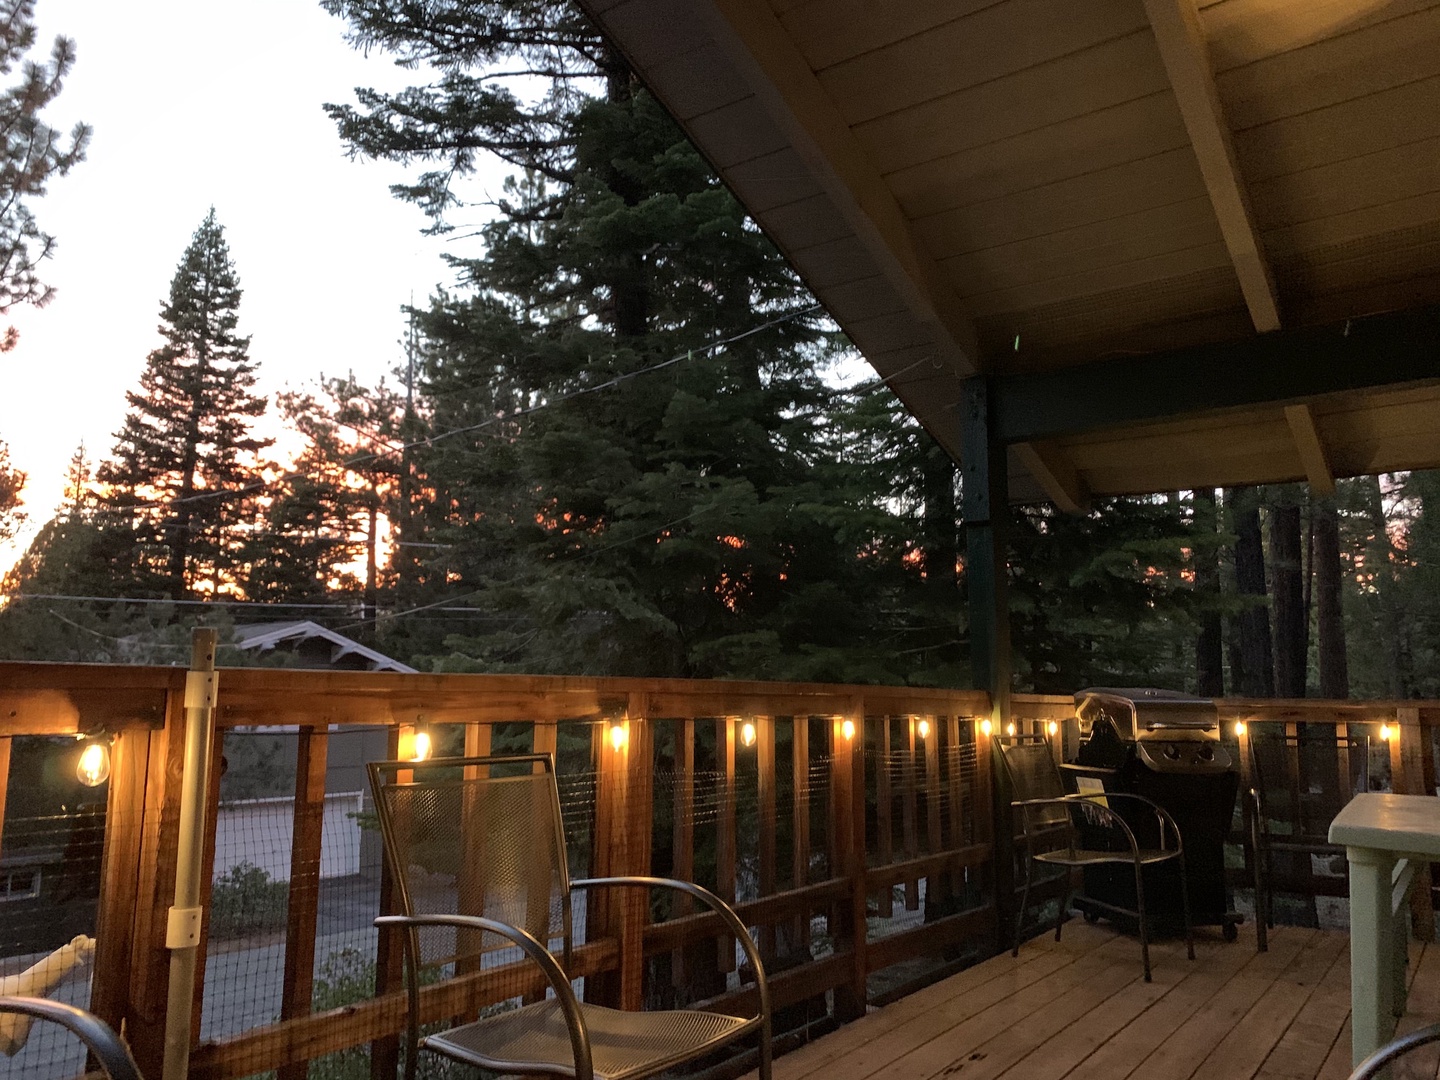 Upper patio during evening sunset